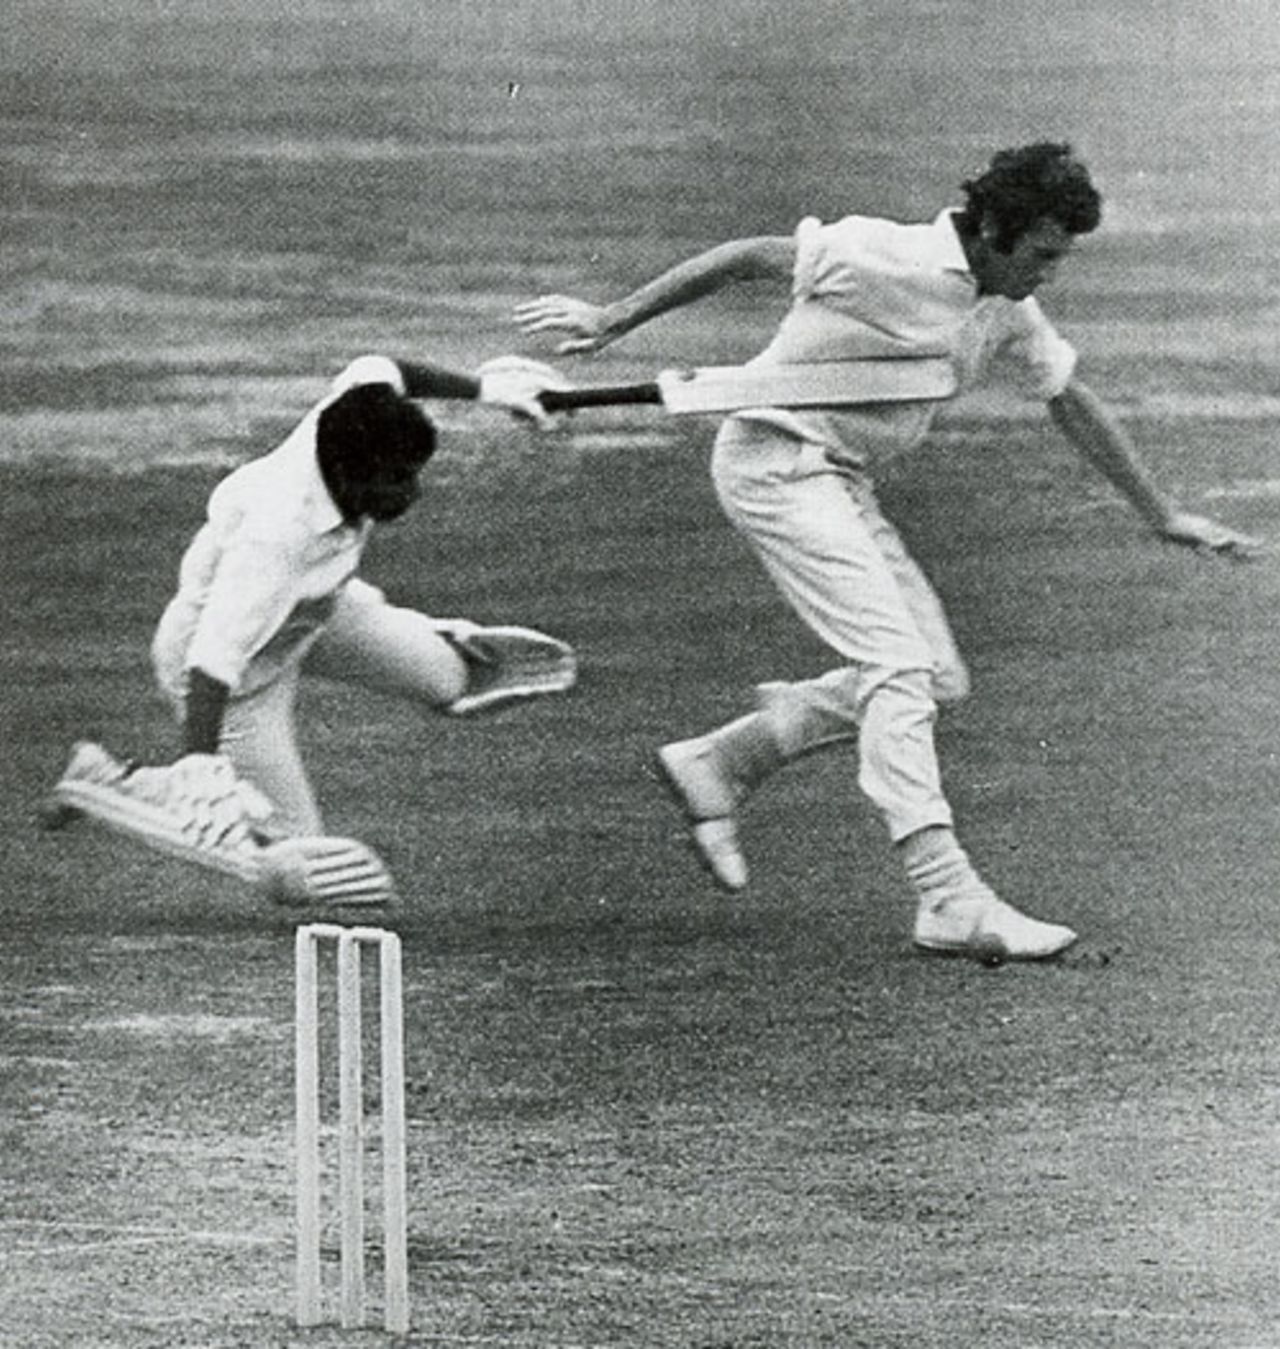 John Snow and Sunil Gavaskar collide. Snow was dropped as a result of the incident, England v India, Lord's, July 23, 1971